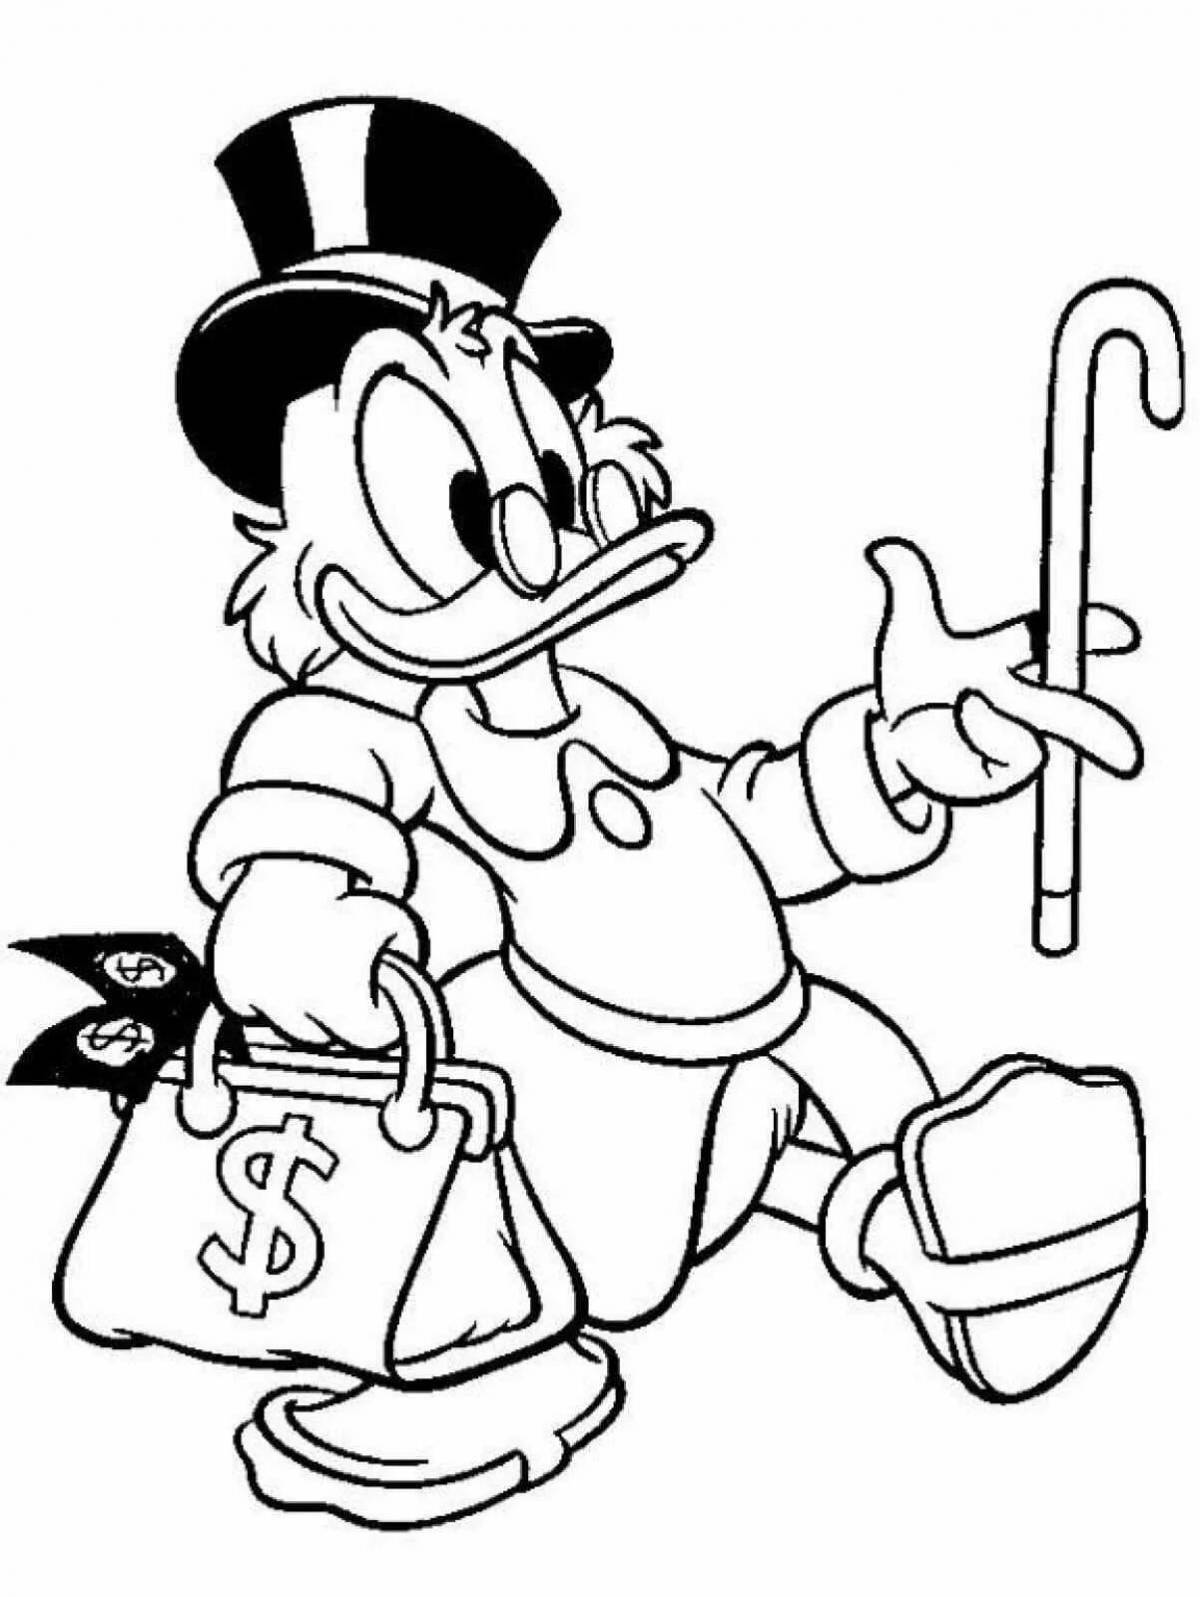 Donald duck with money #11